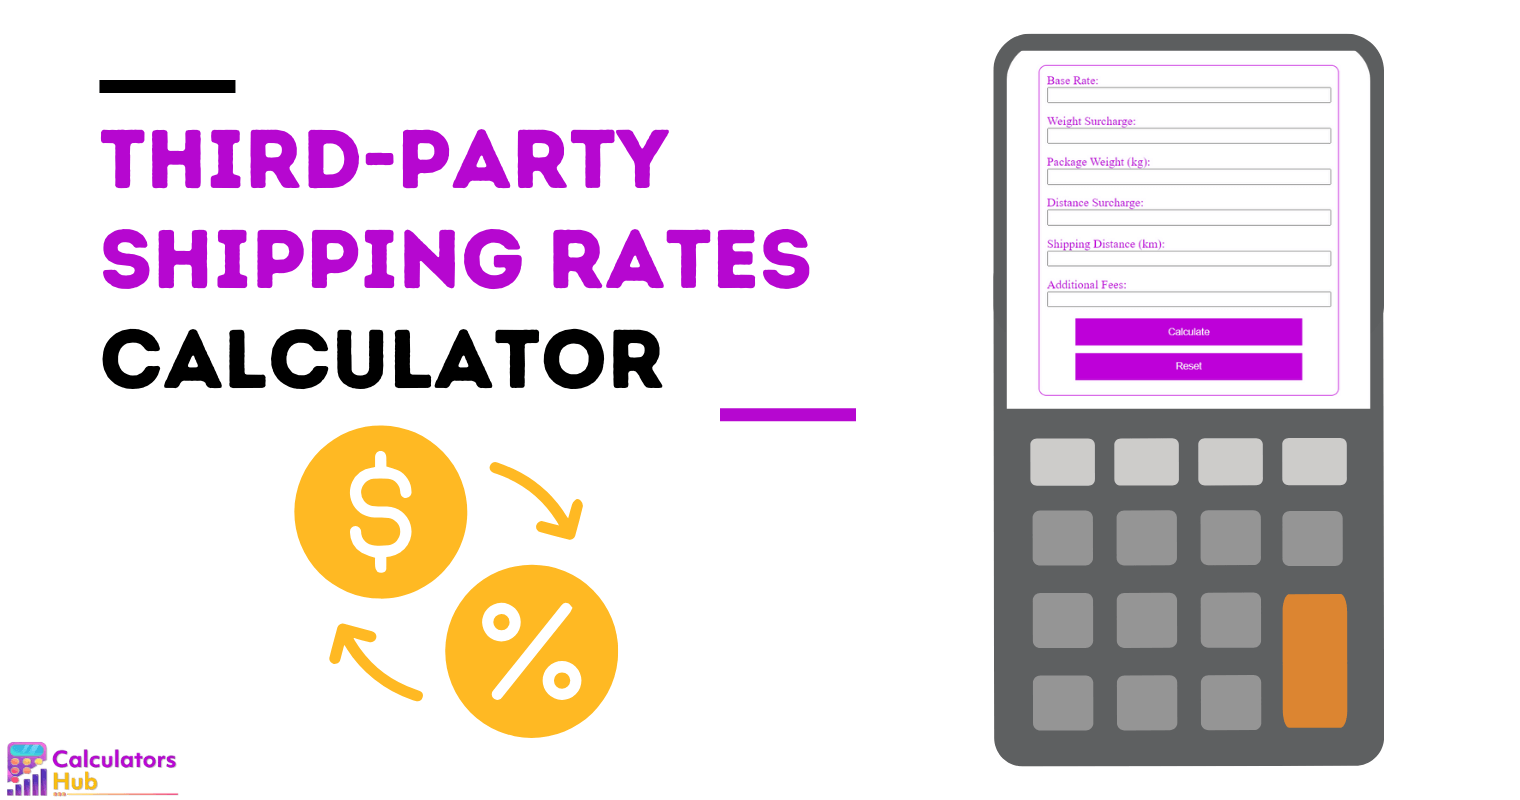 Third-Party Shipping Rates Calculator